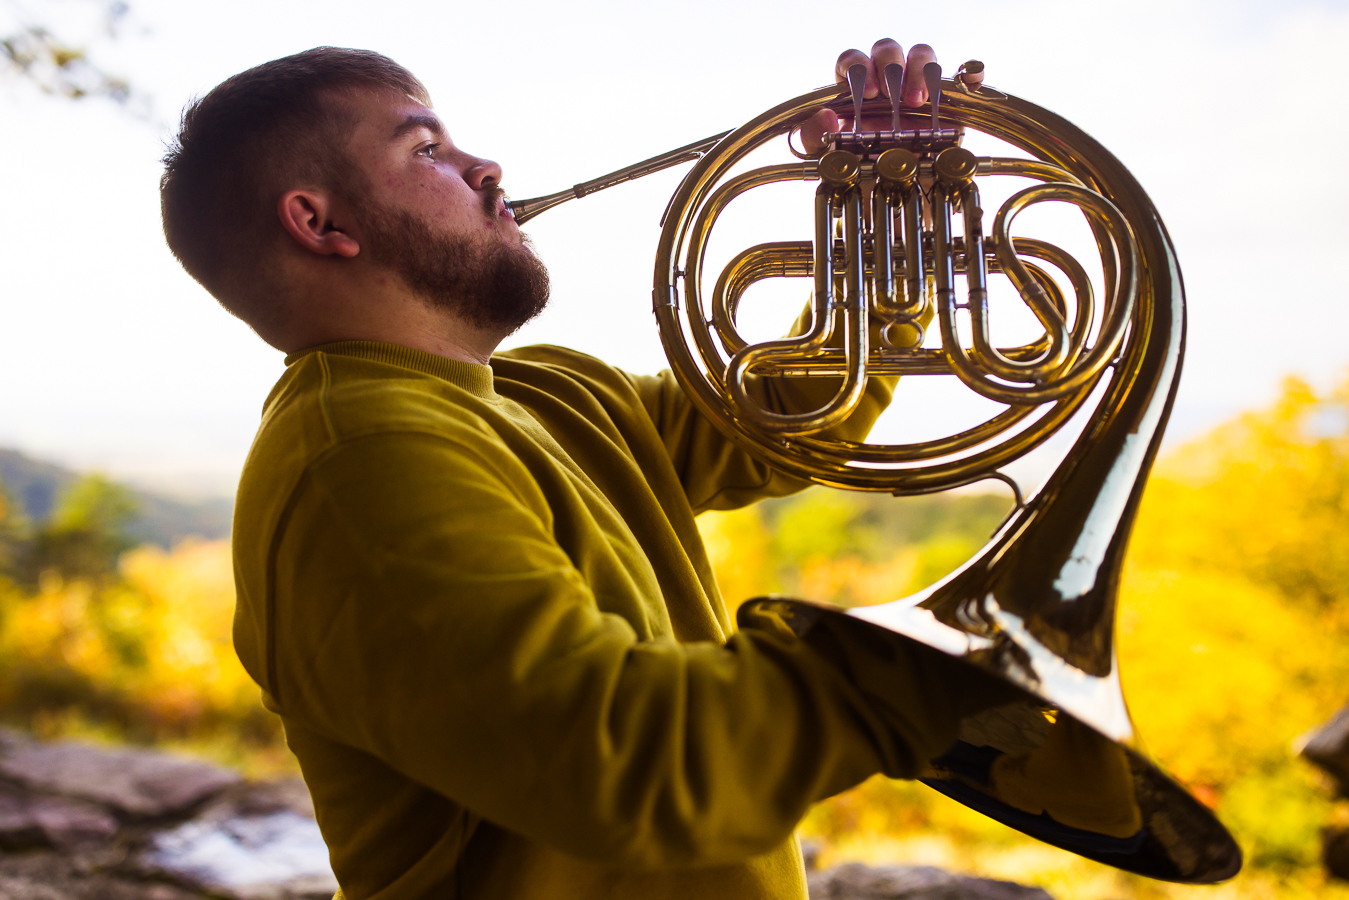 Creative portrait photographer, lisa rhinehart, captures this image of this french horn player as he shows off how he can play his instrument with cerebral palsy ontop of the mountain at kings gap mansion in central pa surrounded by the vibrant, colorful fall foliage